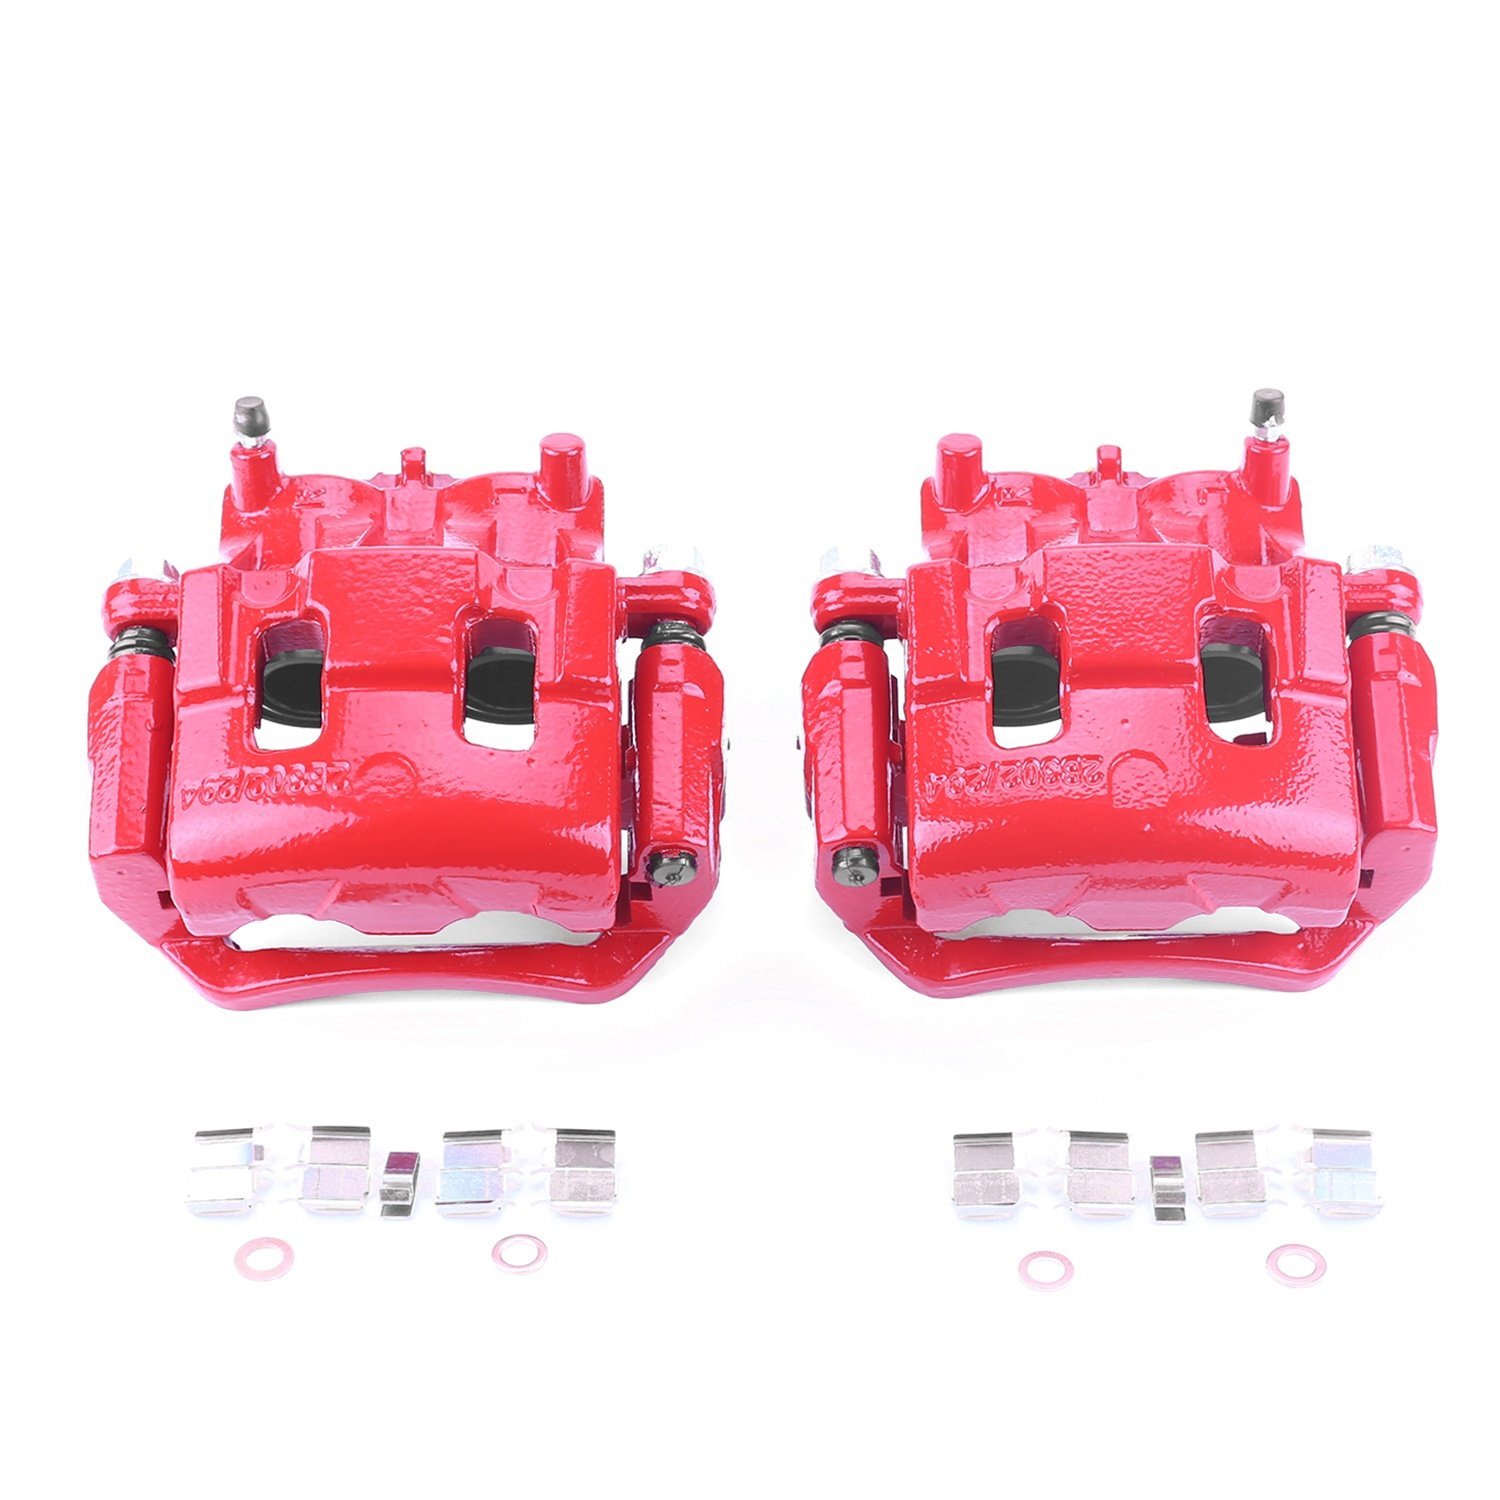 Performance Brake Calipers Fit Select 2007-2015 Ford Edge,